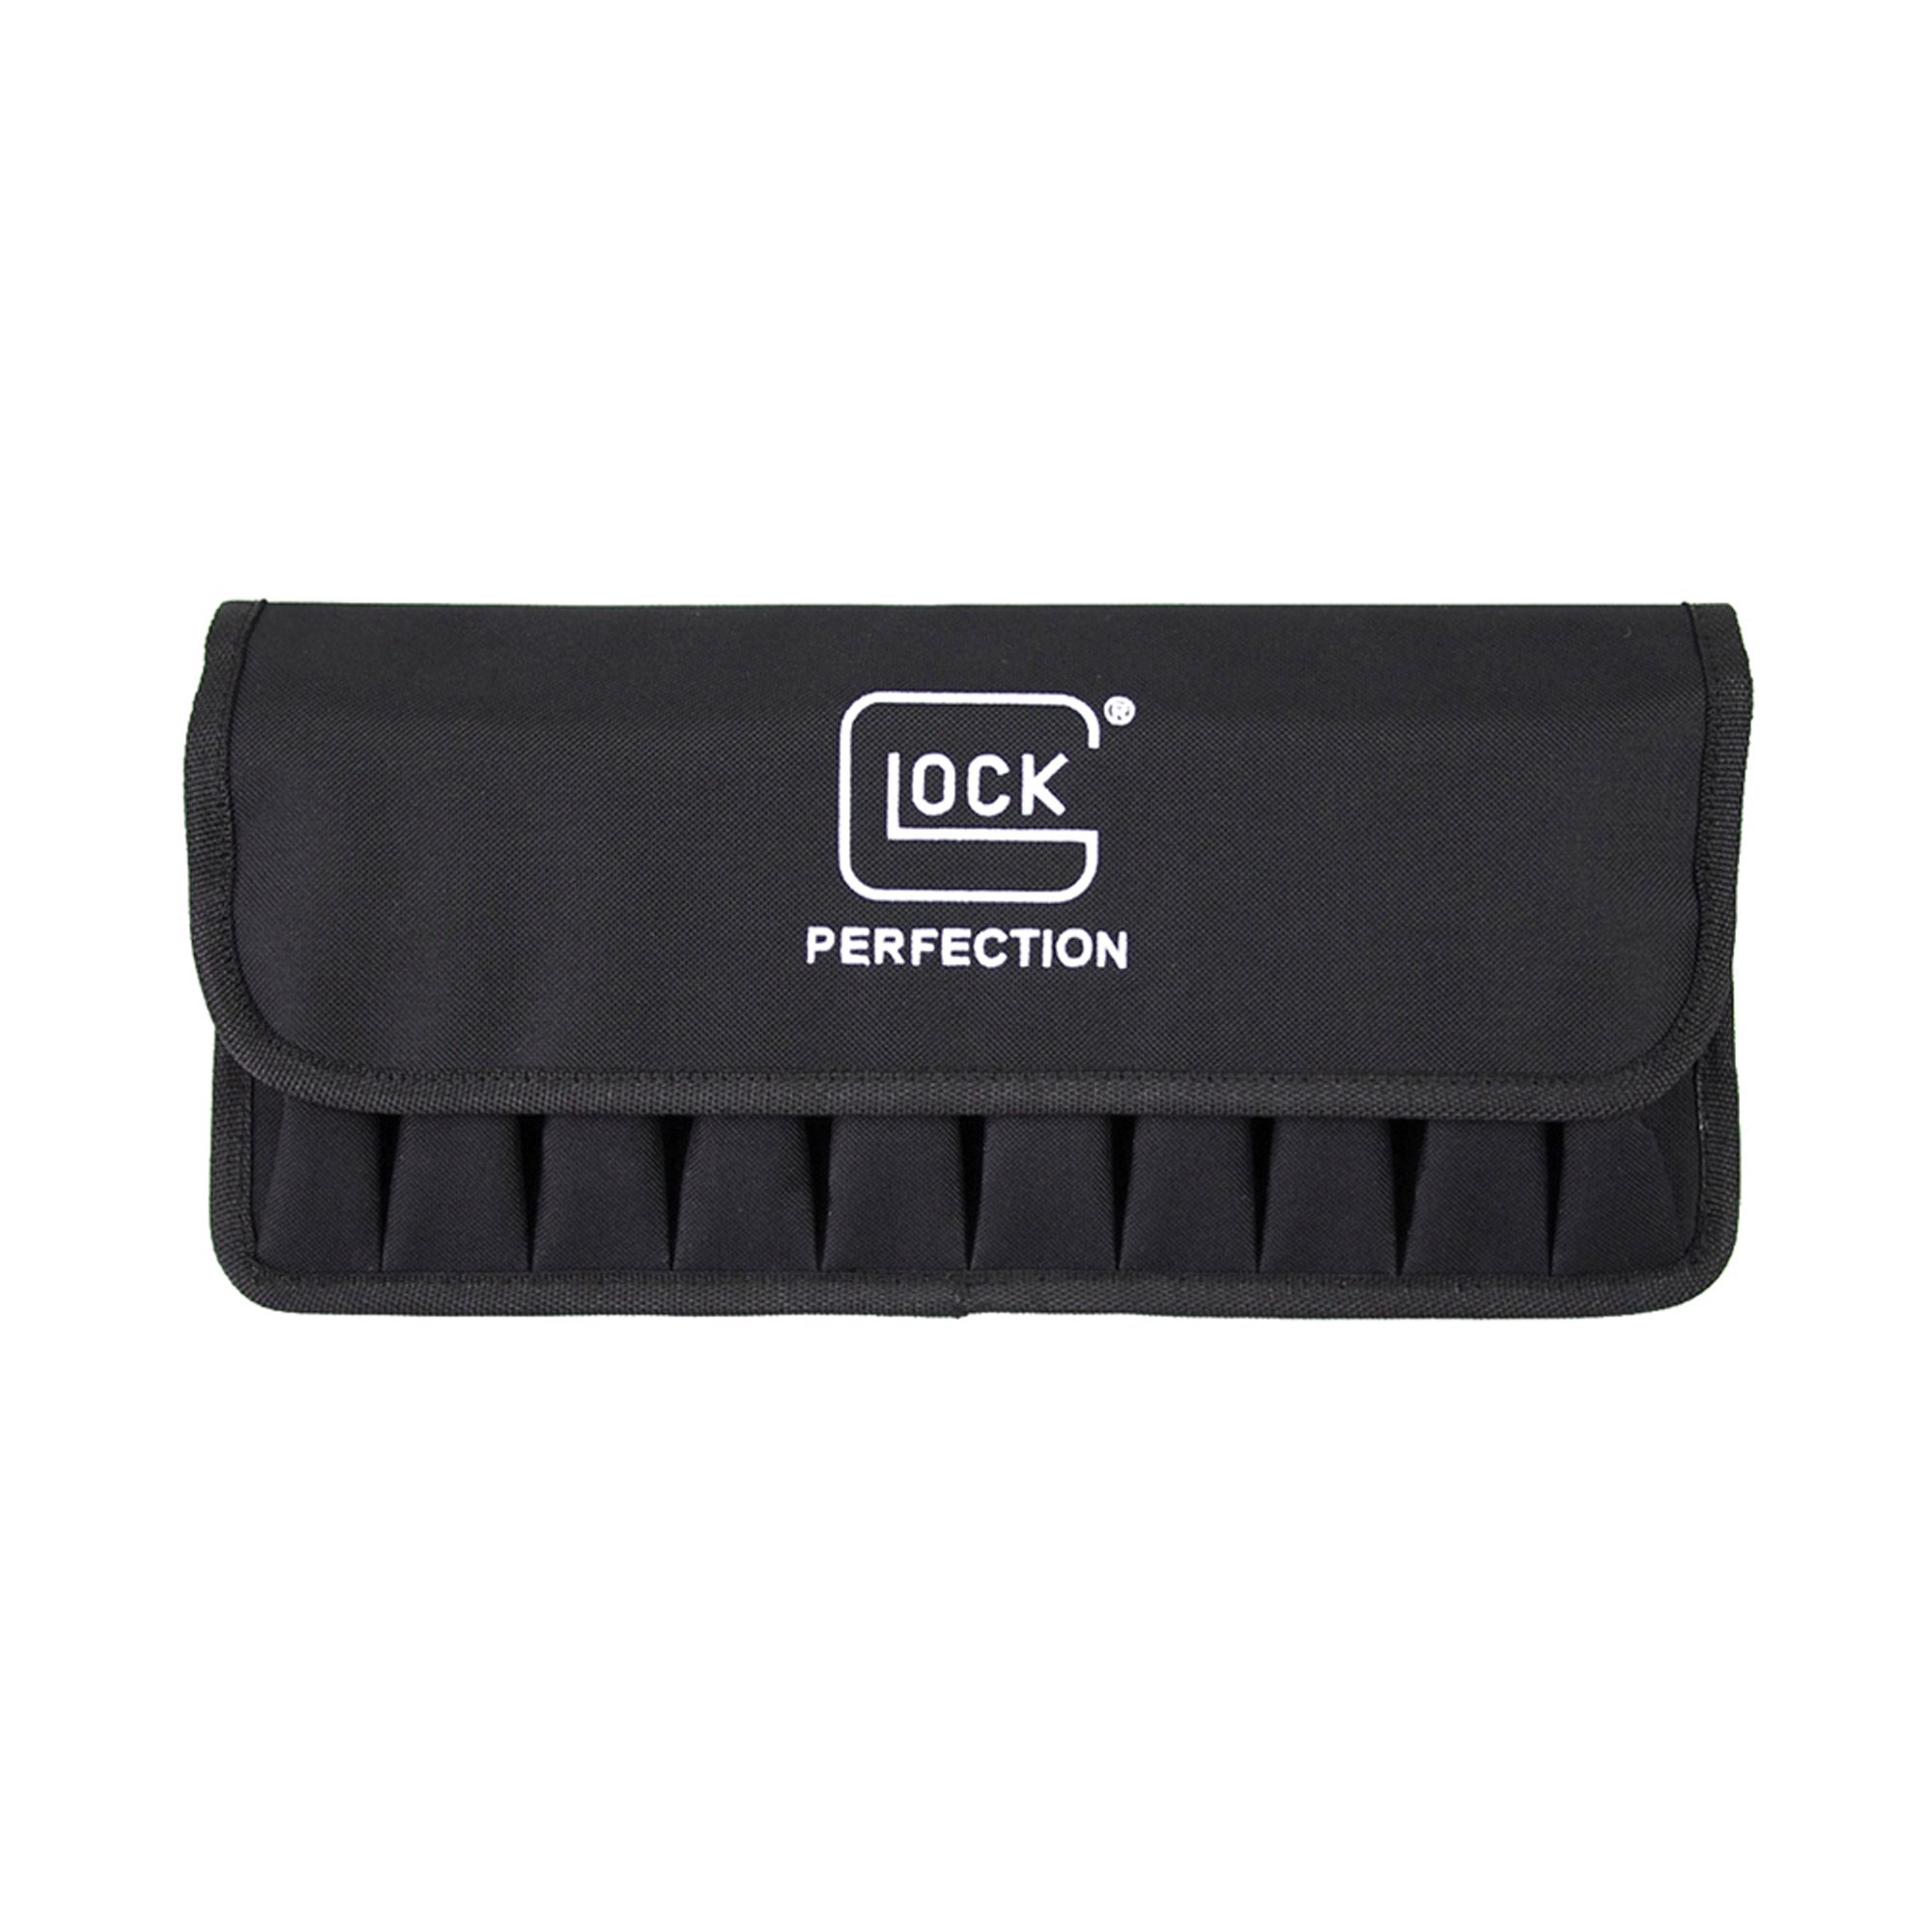 GLOCK Perfection OEM 10 Magazine Pouch with Cover AP60221